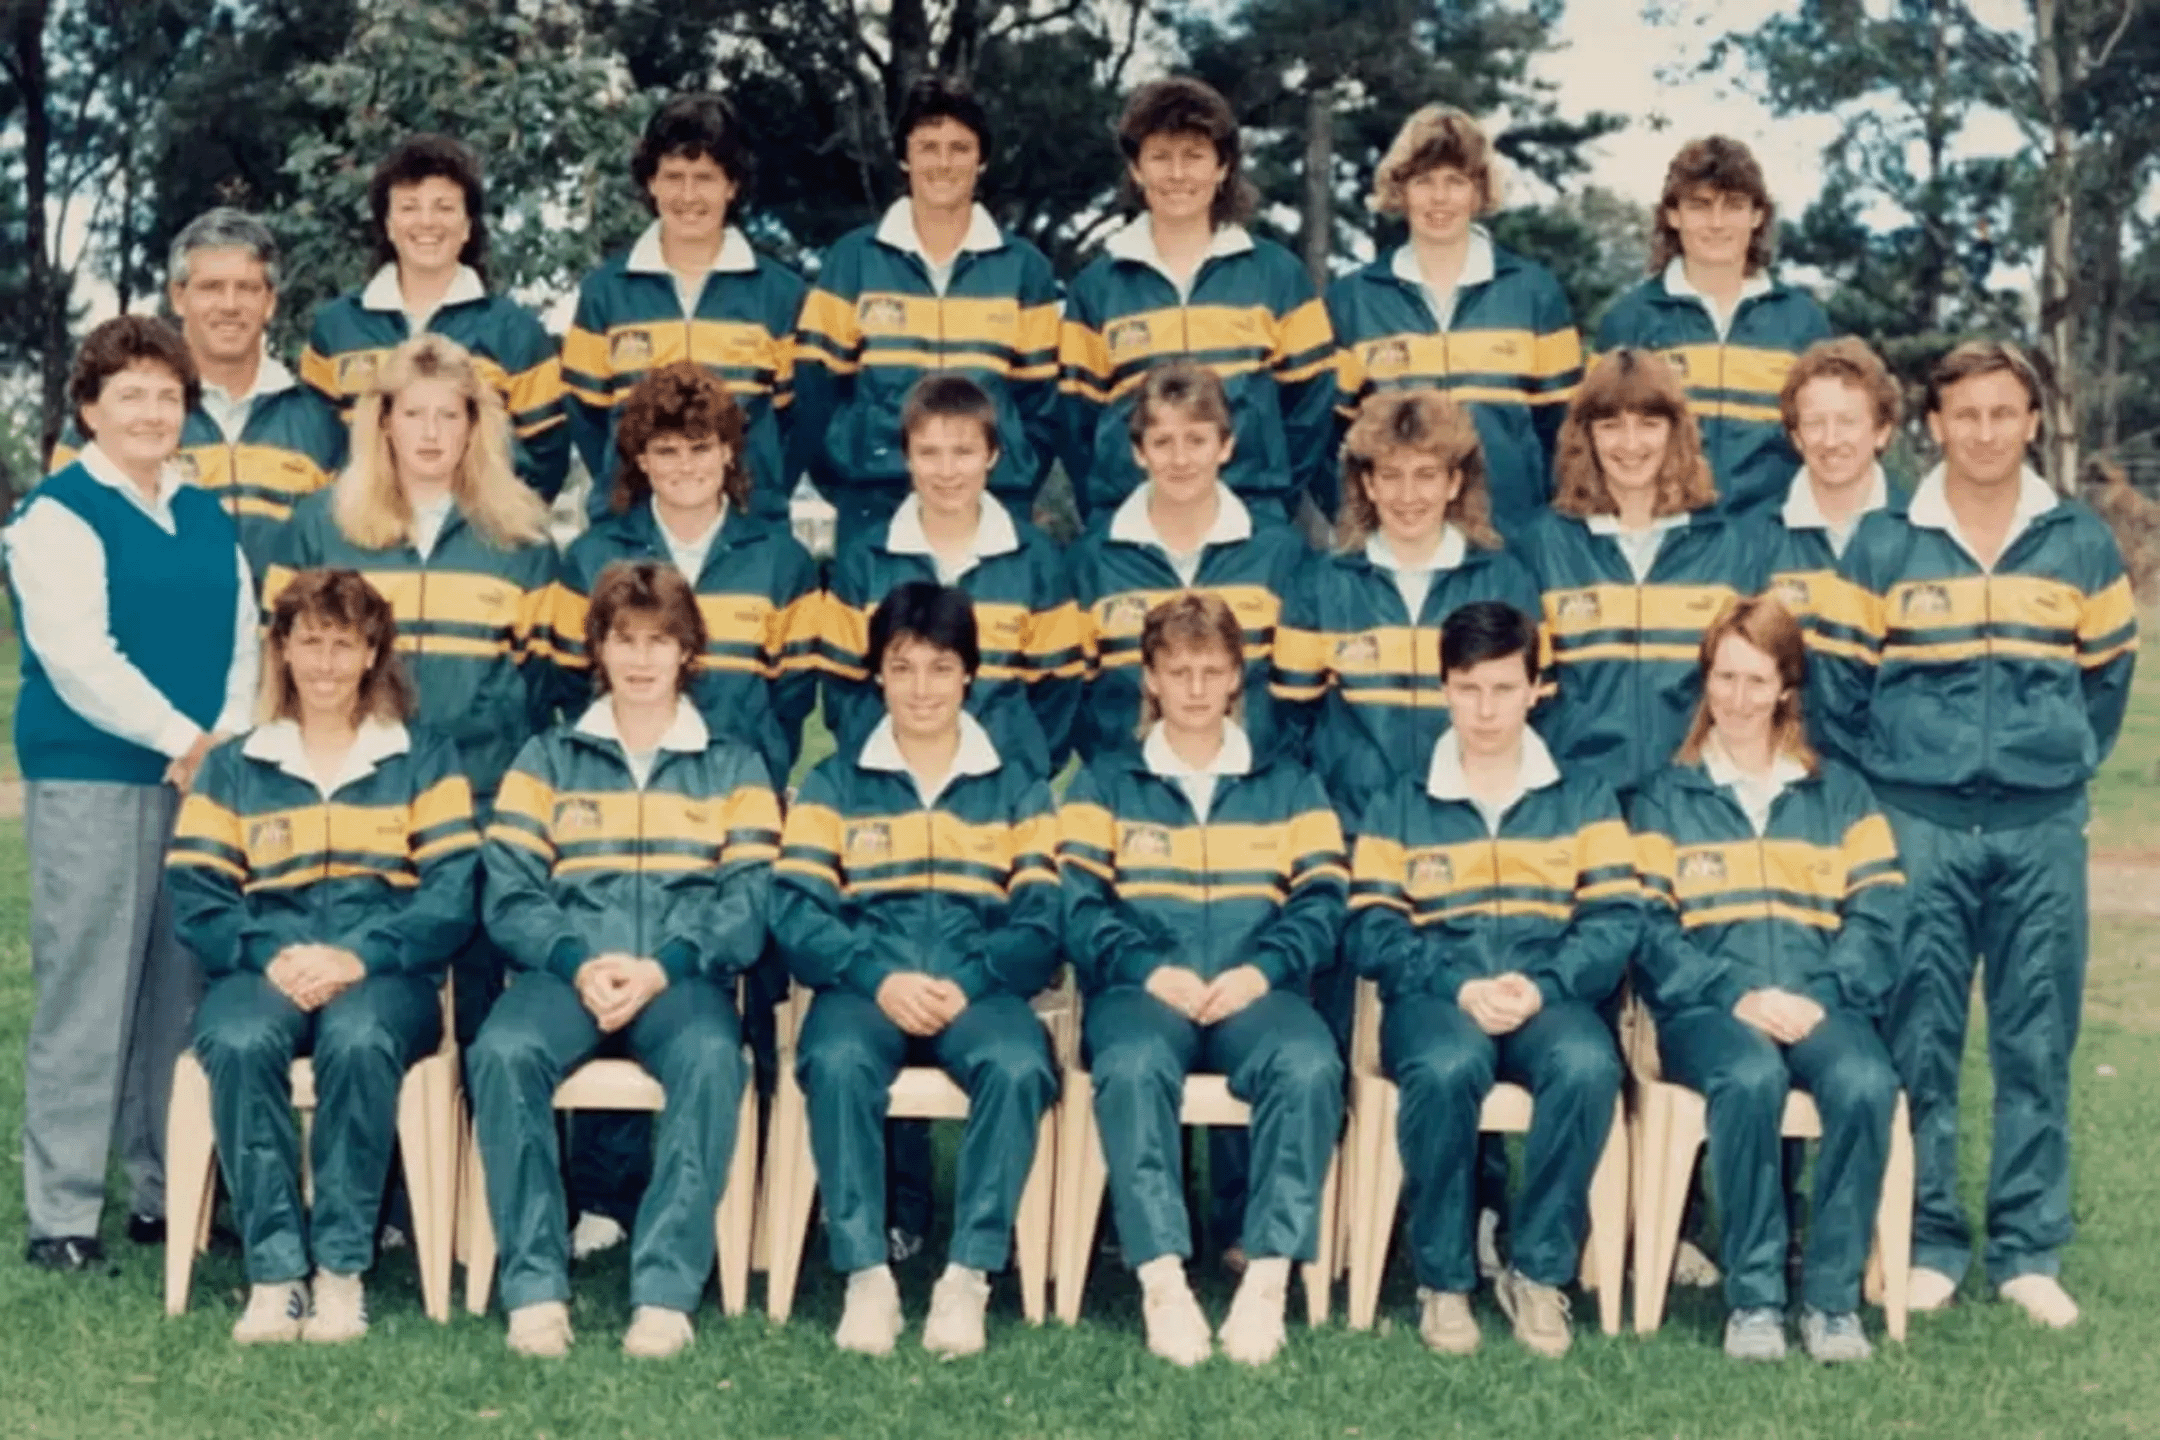 The Matildas squad of 1988, Moya Dodd is third from the left on the bottom row.